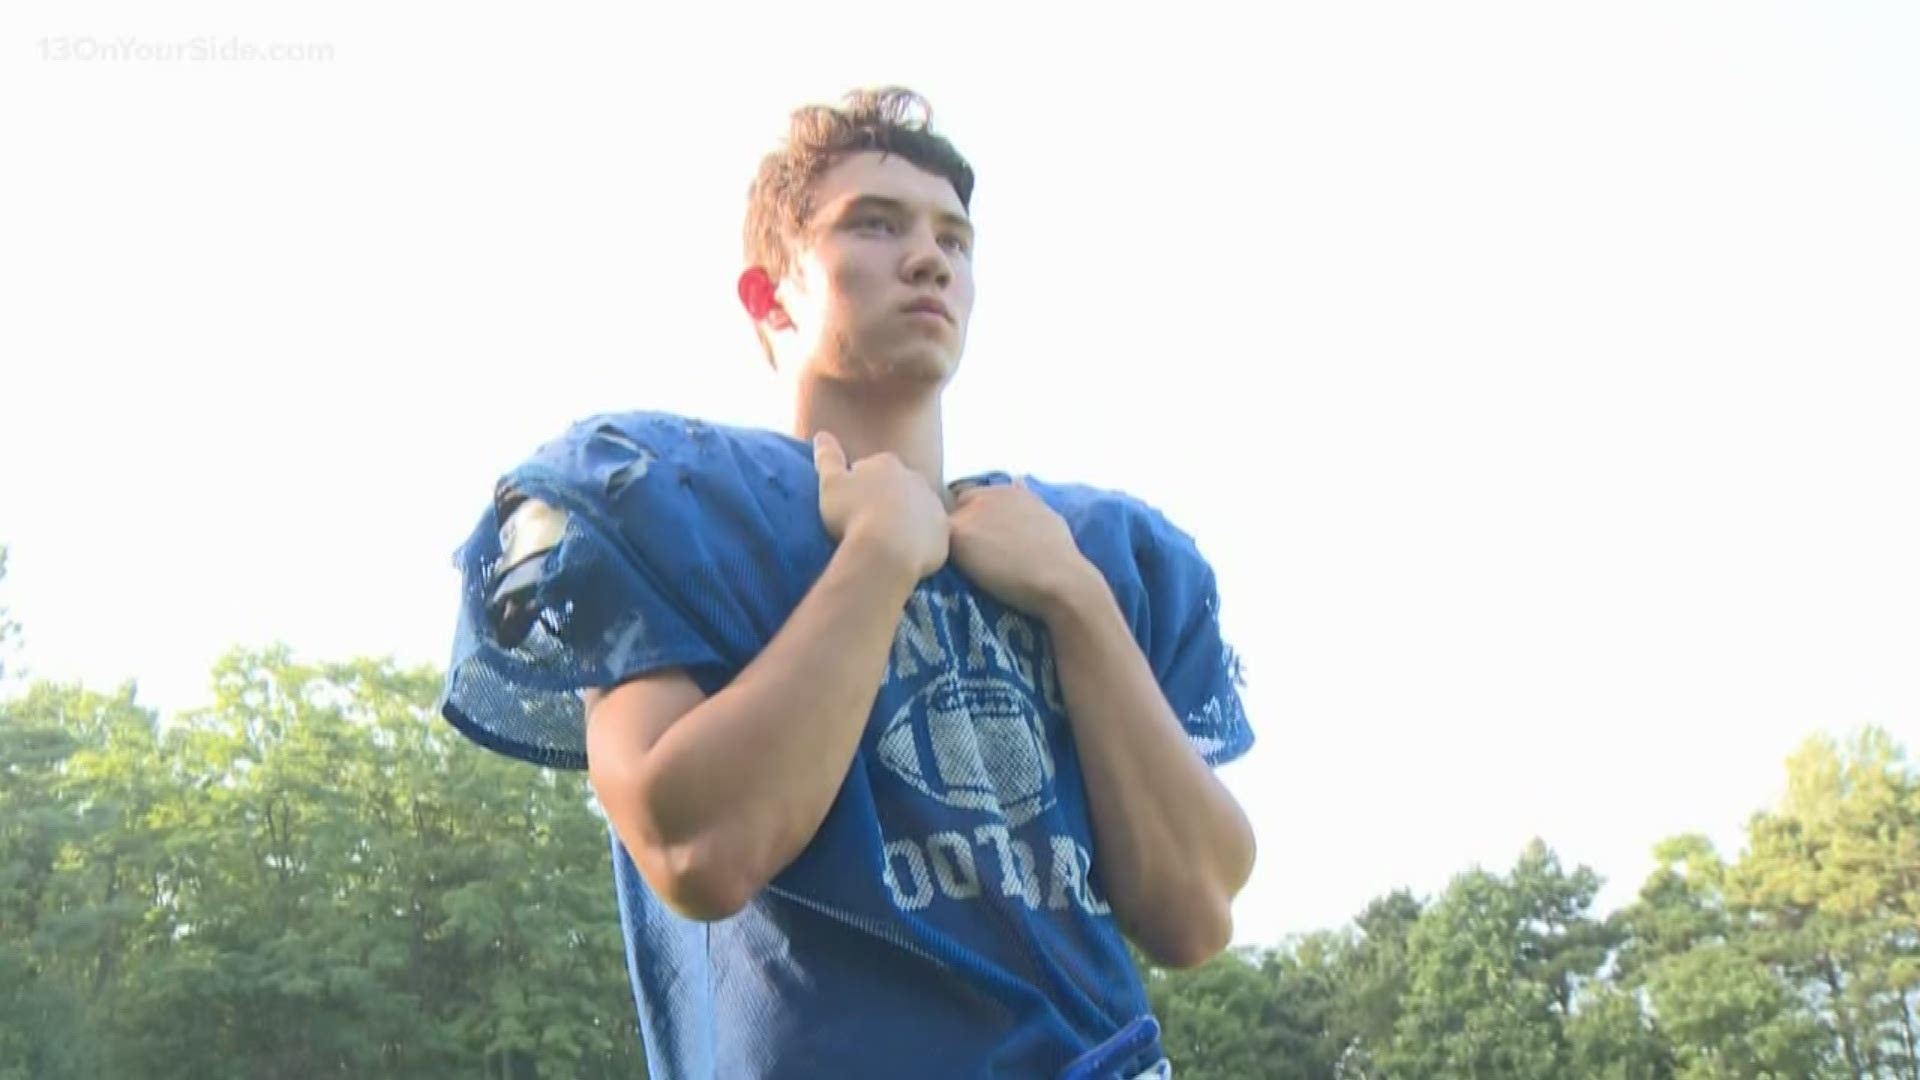 The senior from Montague is a running back on the football team and carries a 4.1 GPA.